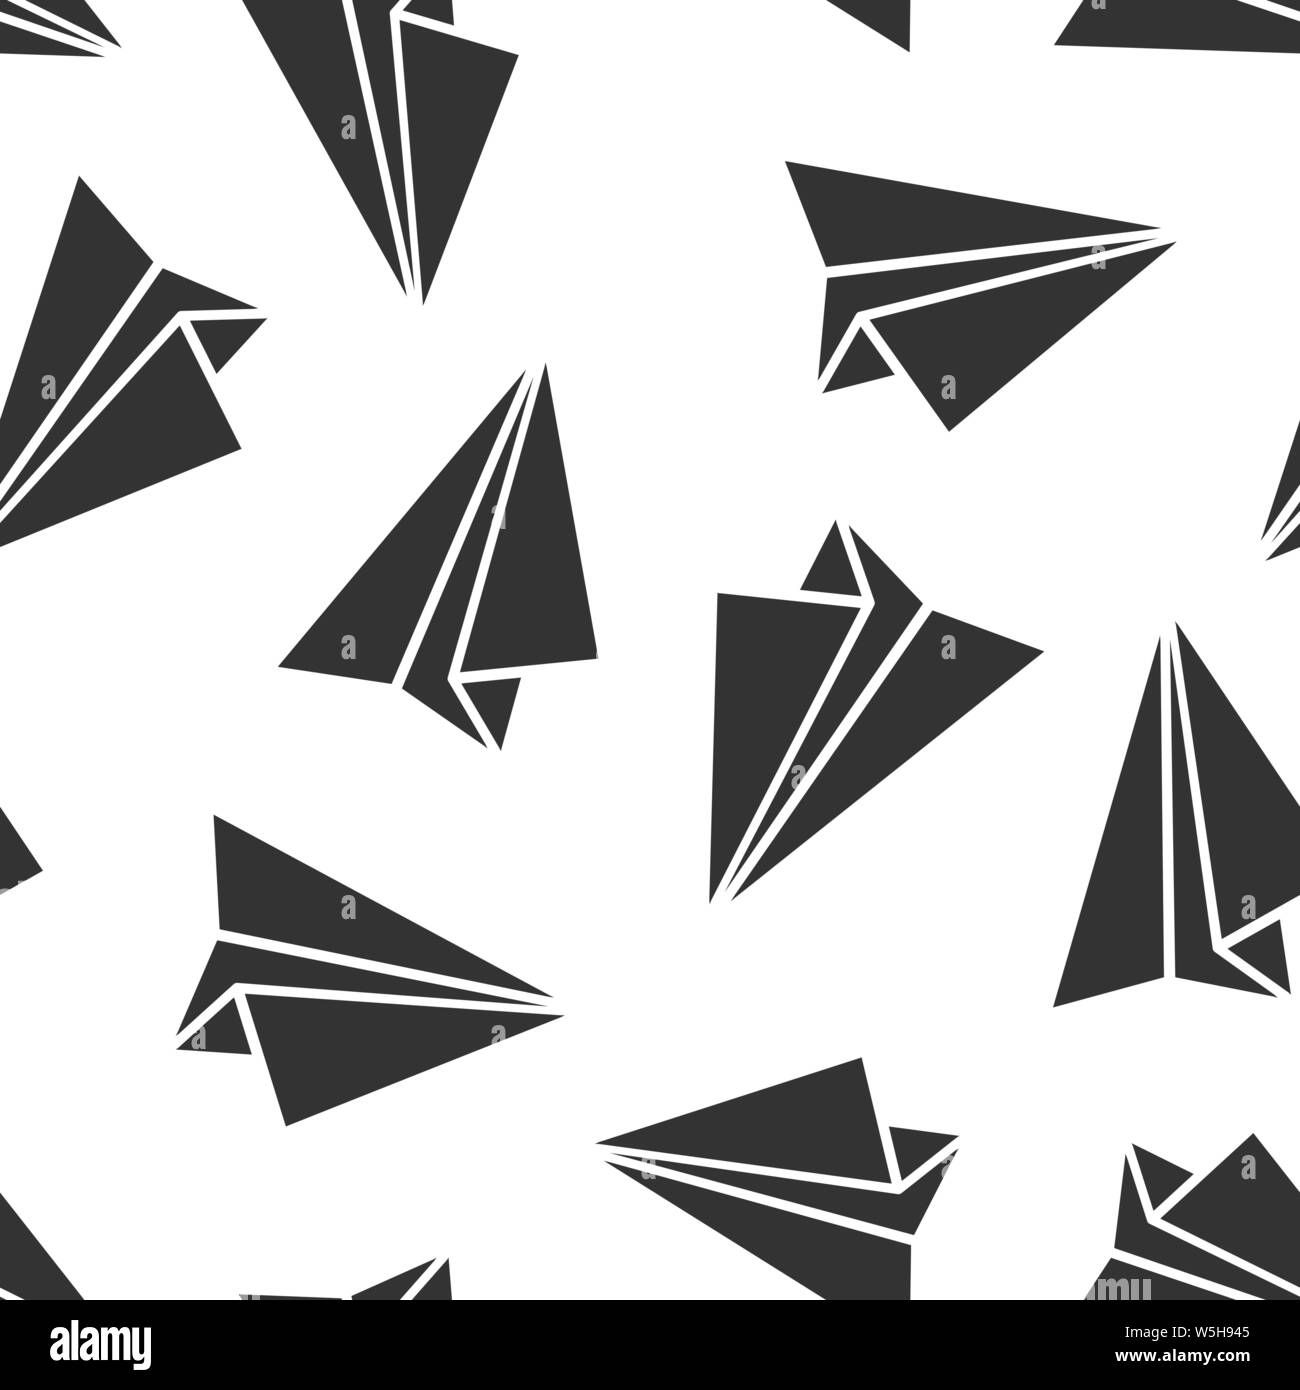 Paper airplane icon seamless pattern background. Plane vector illustration on white isolated background. Air flight business concept. Stock Vector